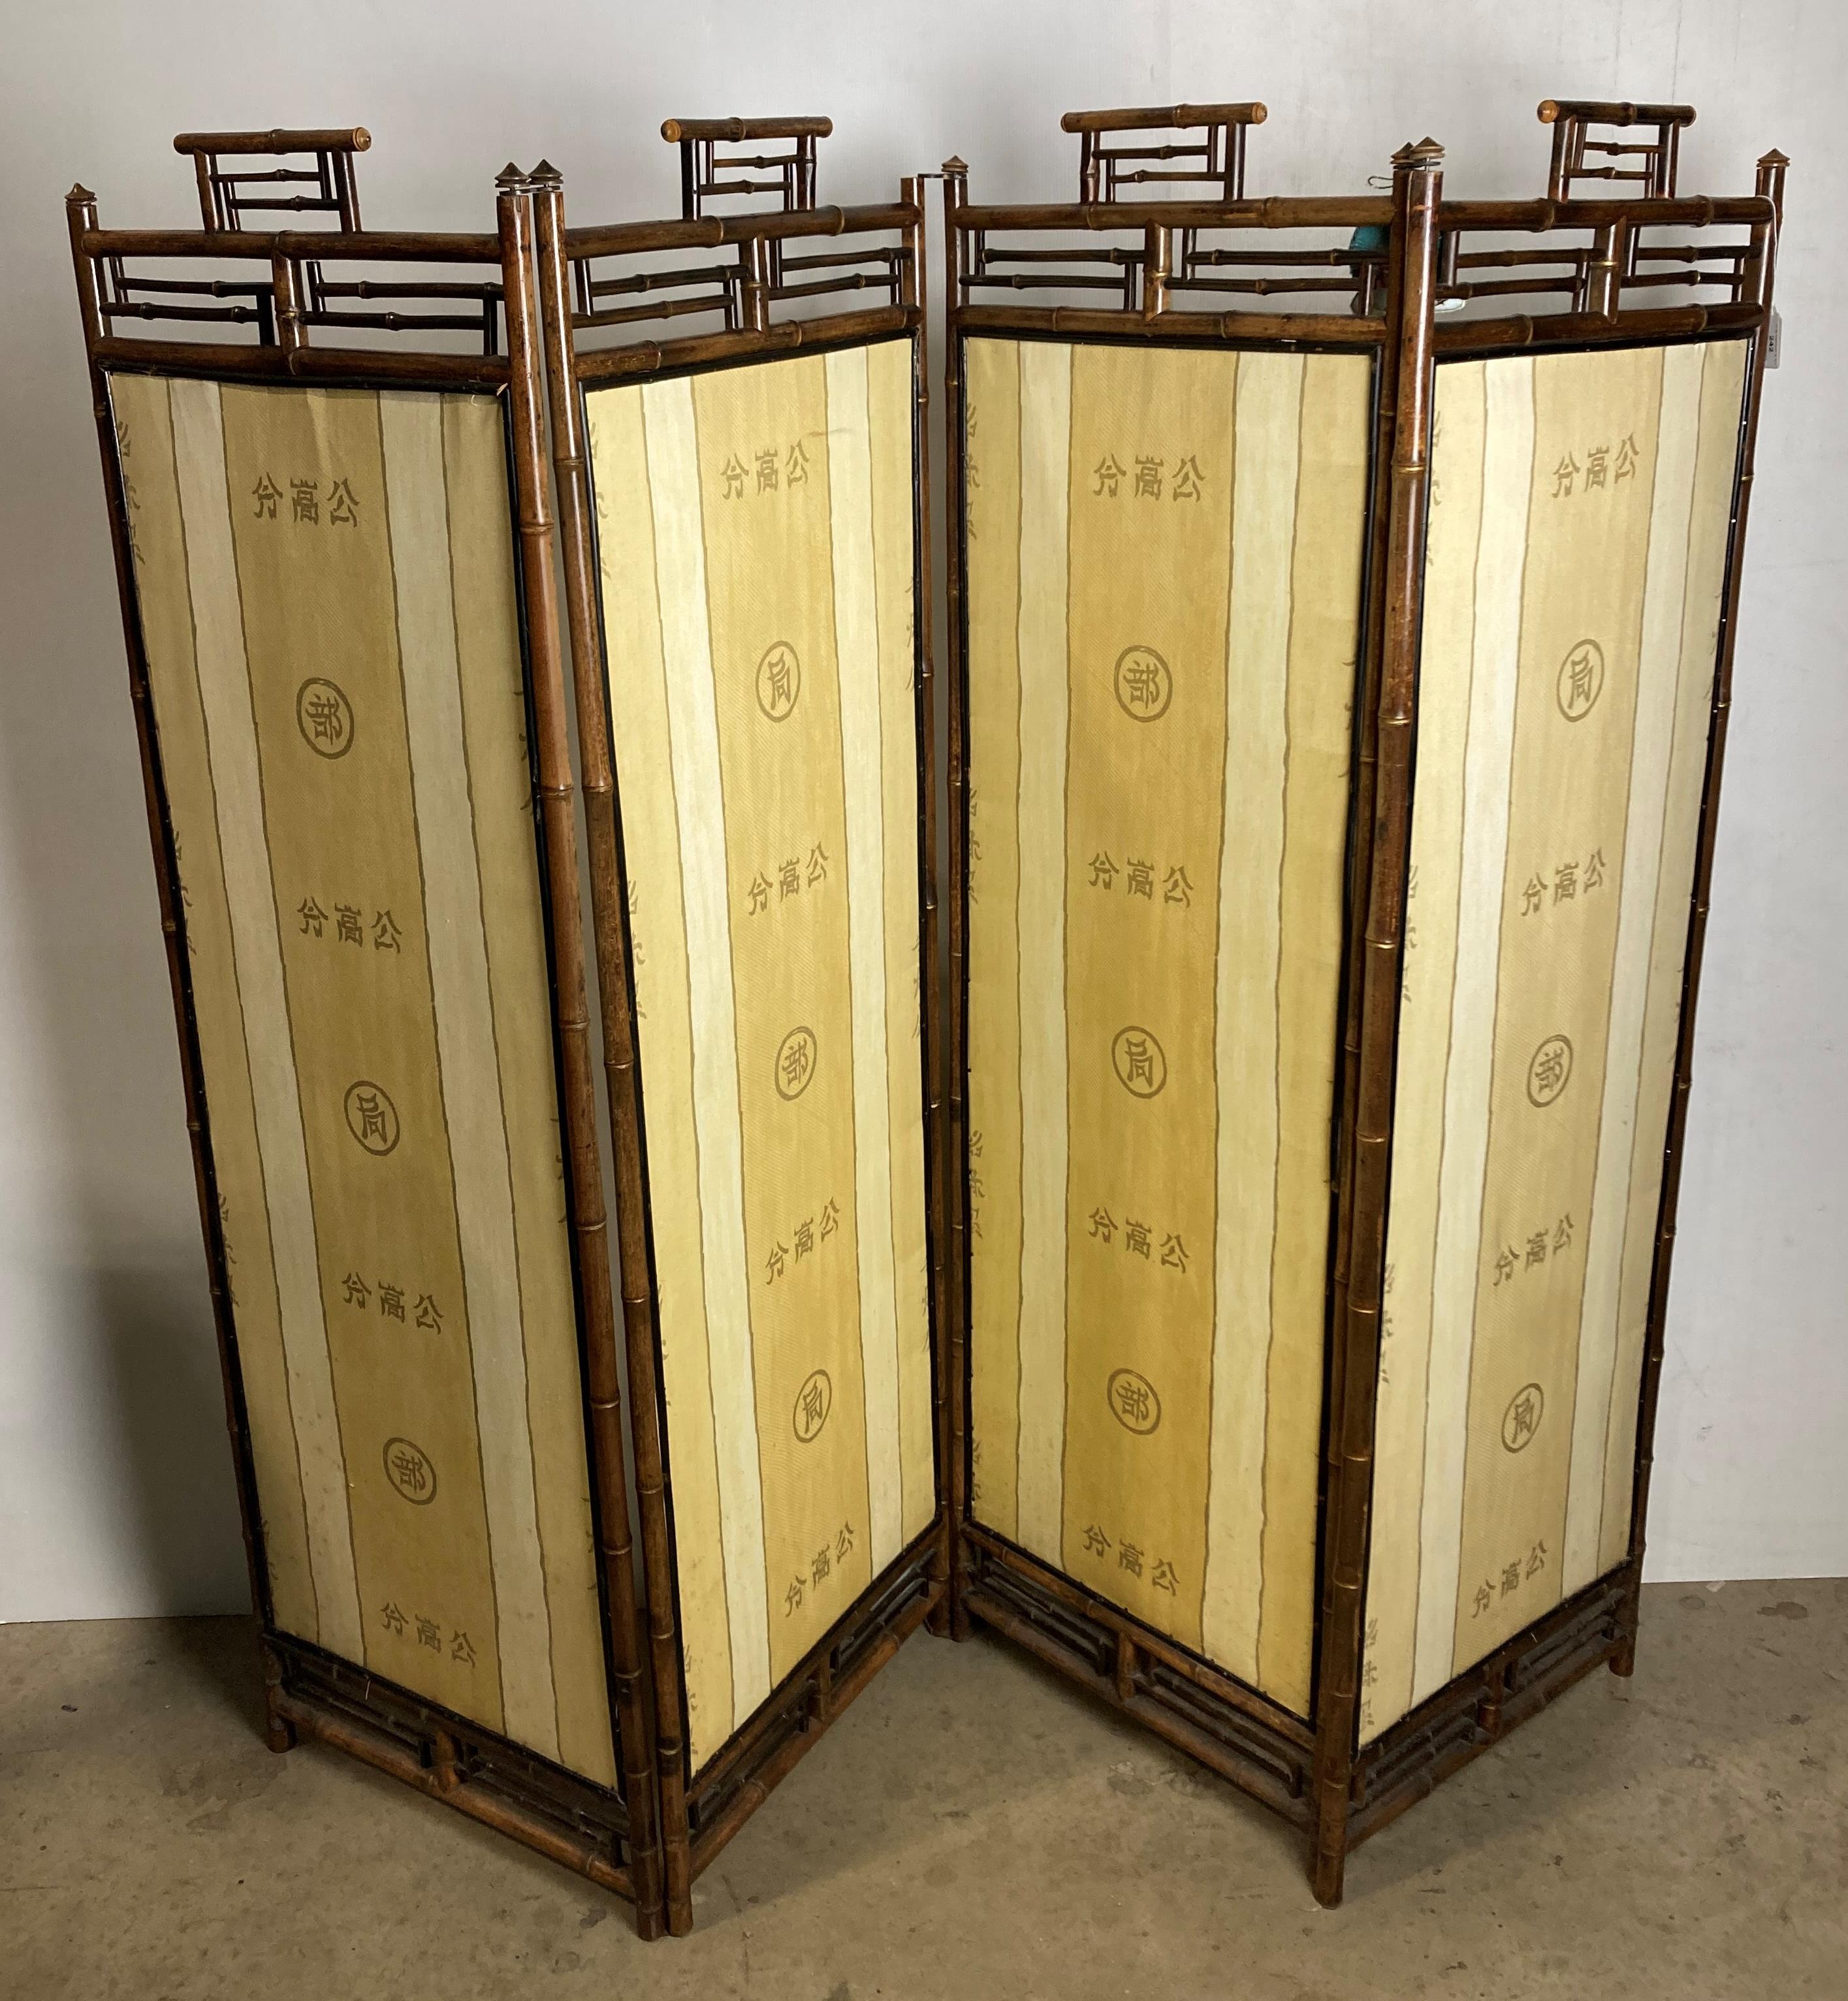 Japanese four-panel cane modesty screen with plain cream fabric to one side and light striped